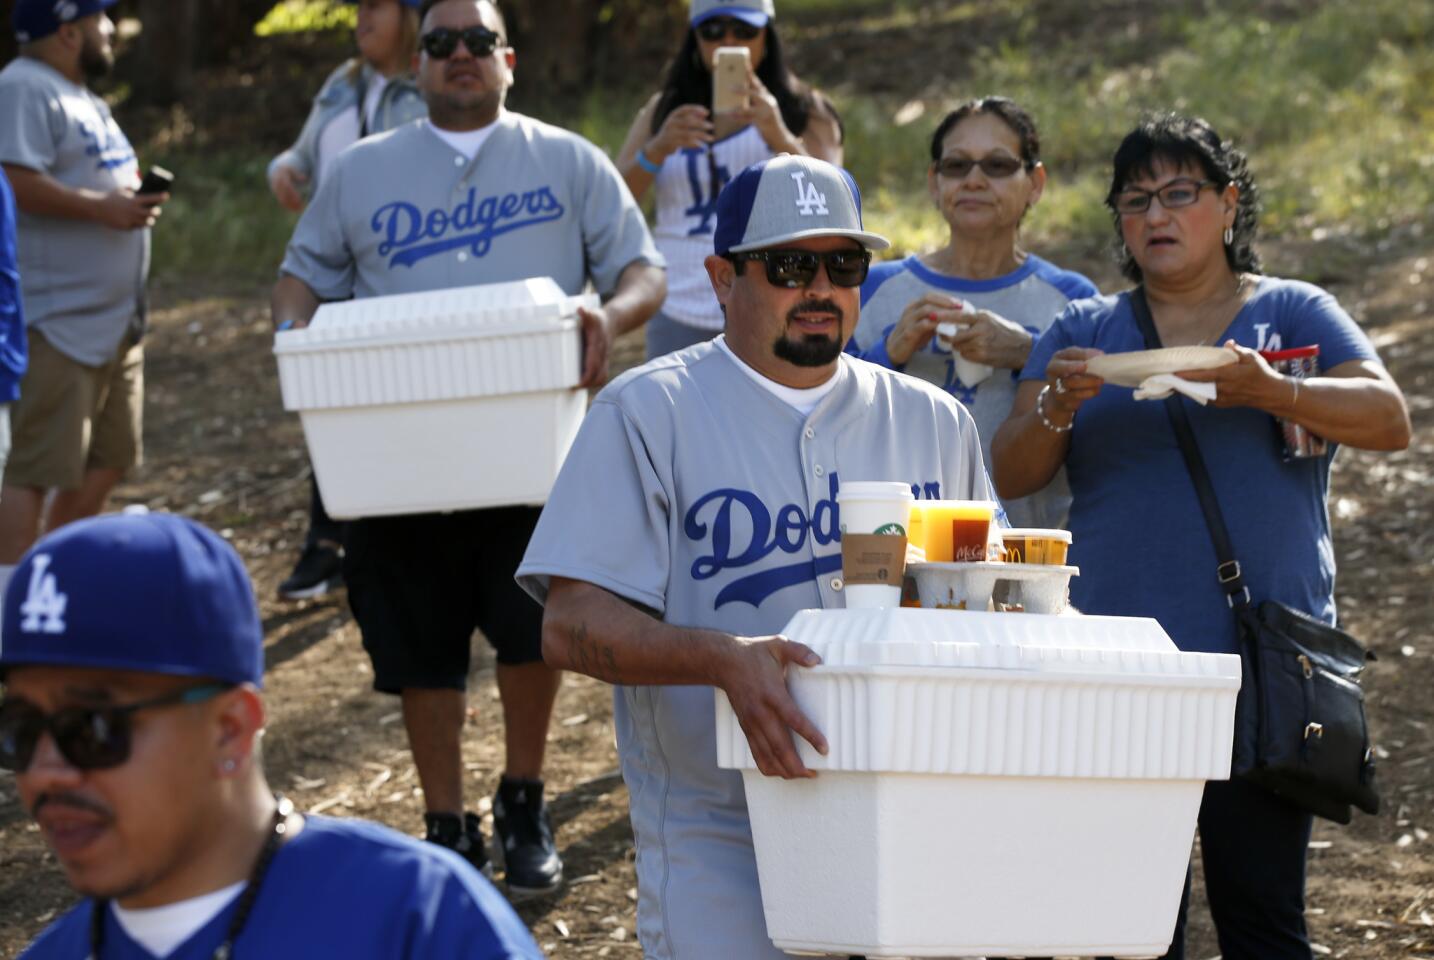 LOS ANGELES, CA., APRIL; 12, 2016: The food is still arriving at the opening day Dodger celebrations in Elysian Park, where live bands, barbecues and fun are all bundled together like tailgate parties used to be April 12, 2016 (Mark Boster / Los Angeles Times ).